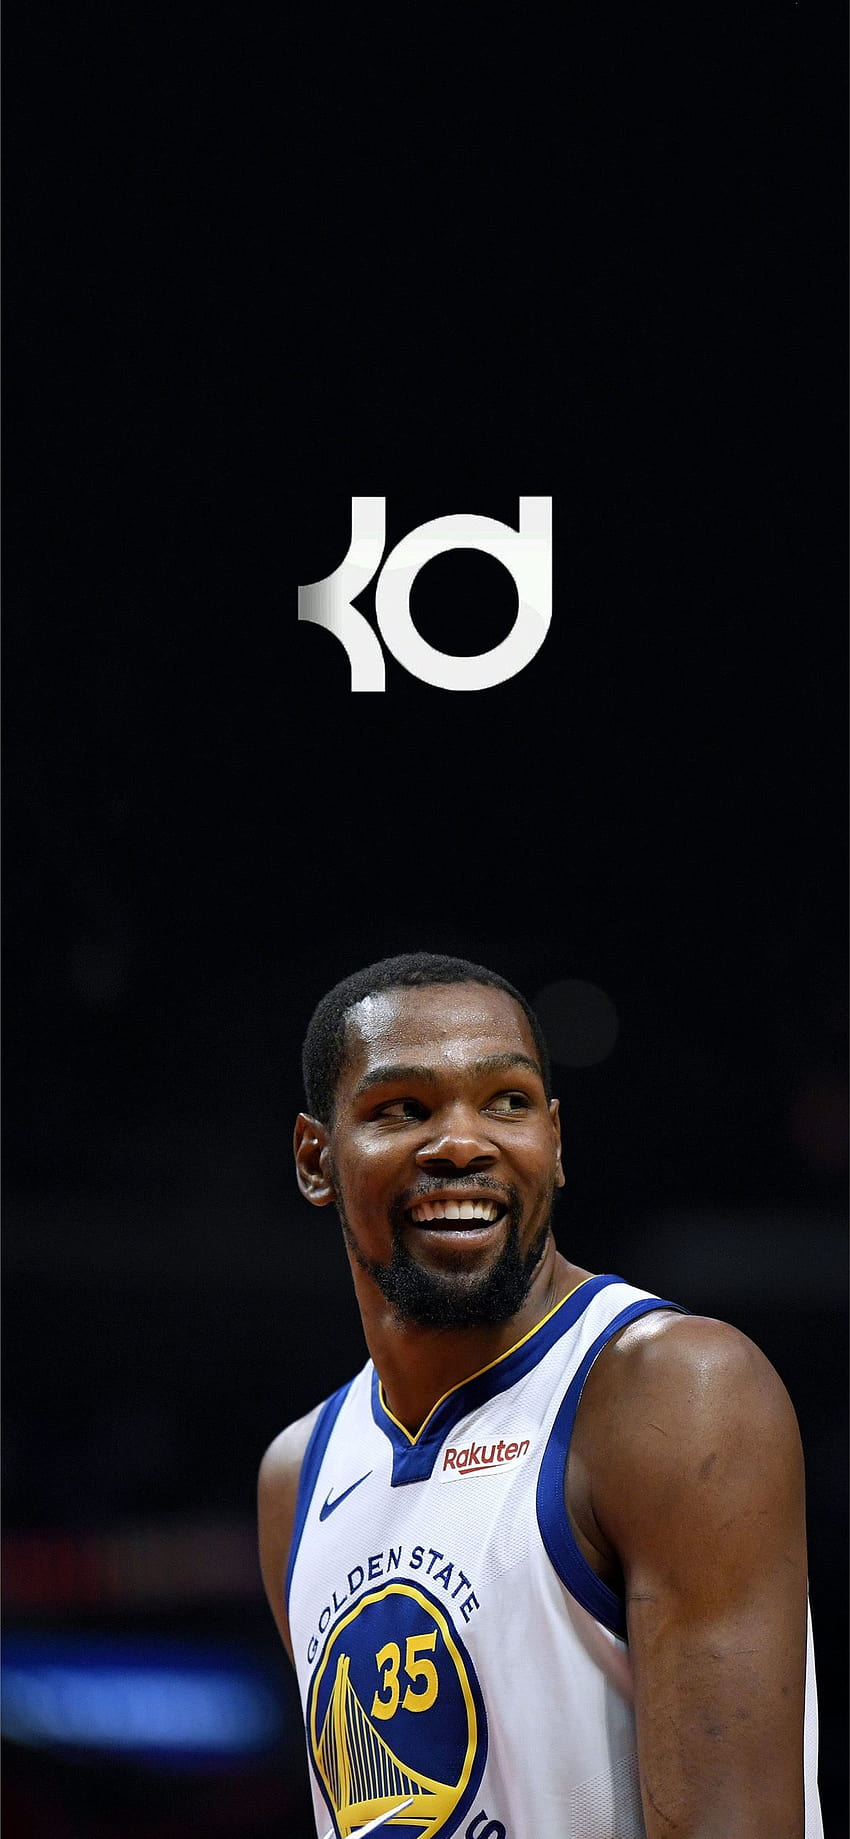 Best Kevin durant warriors iPhone, kevin durant golden state HD phone wallpaper